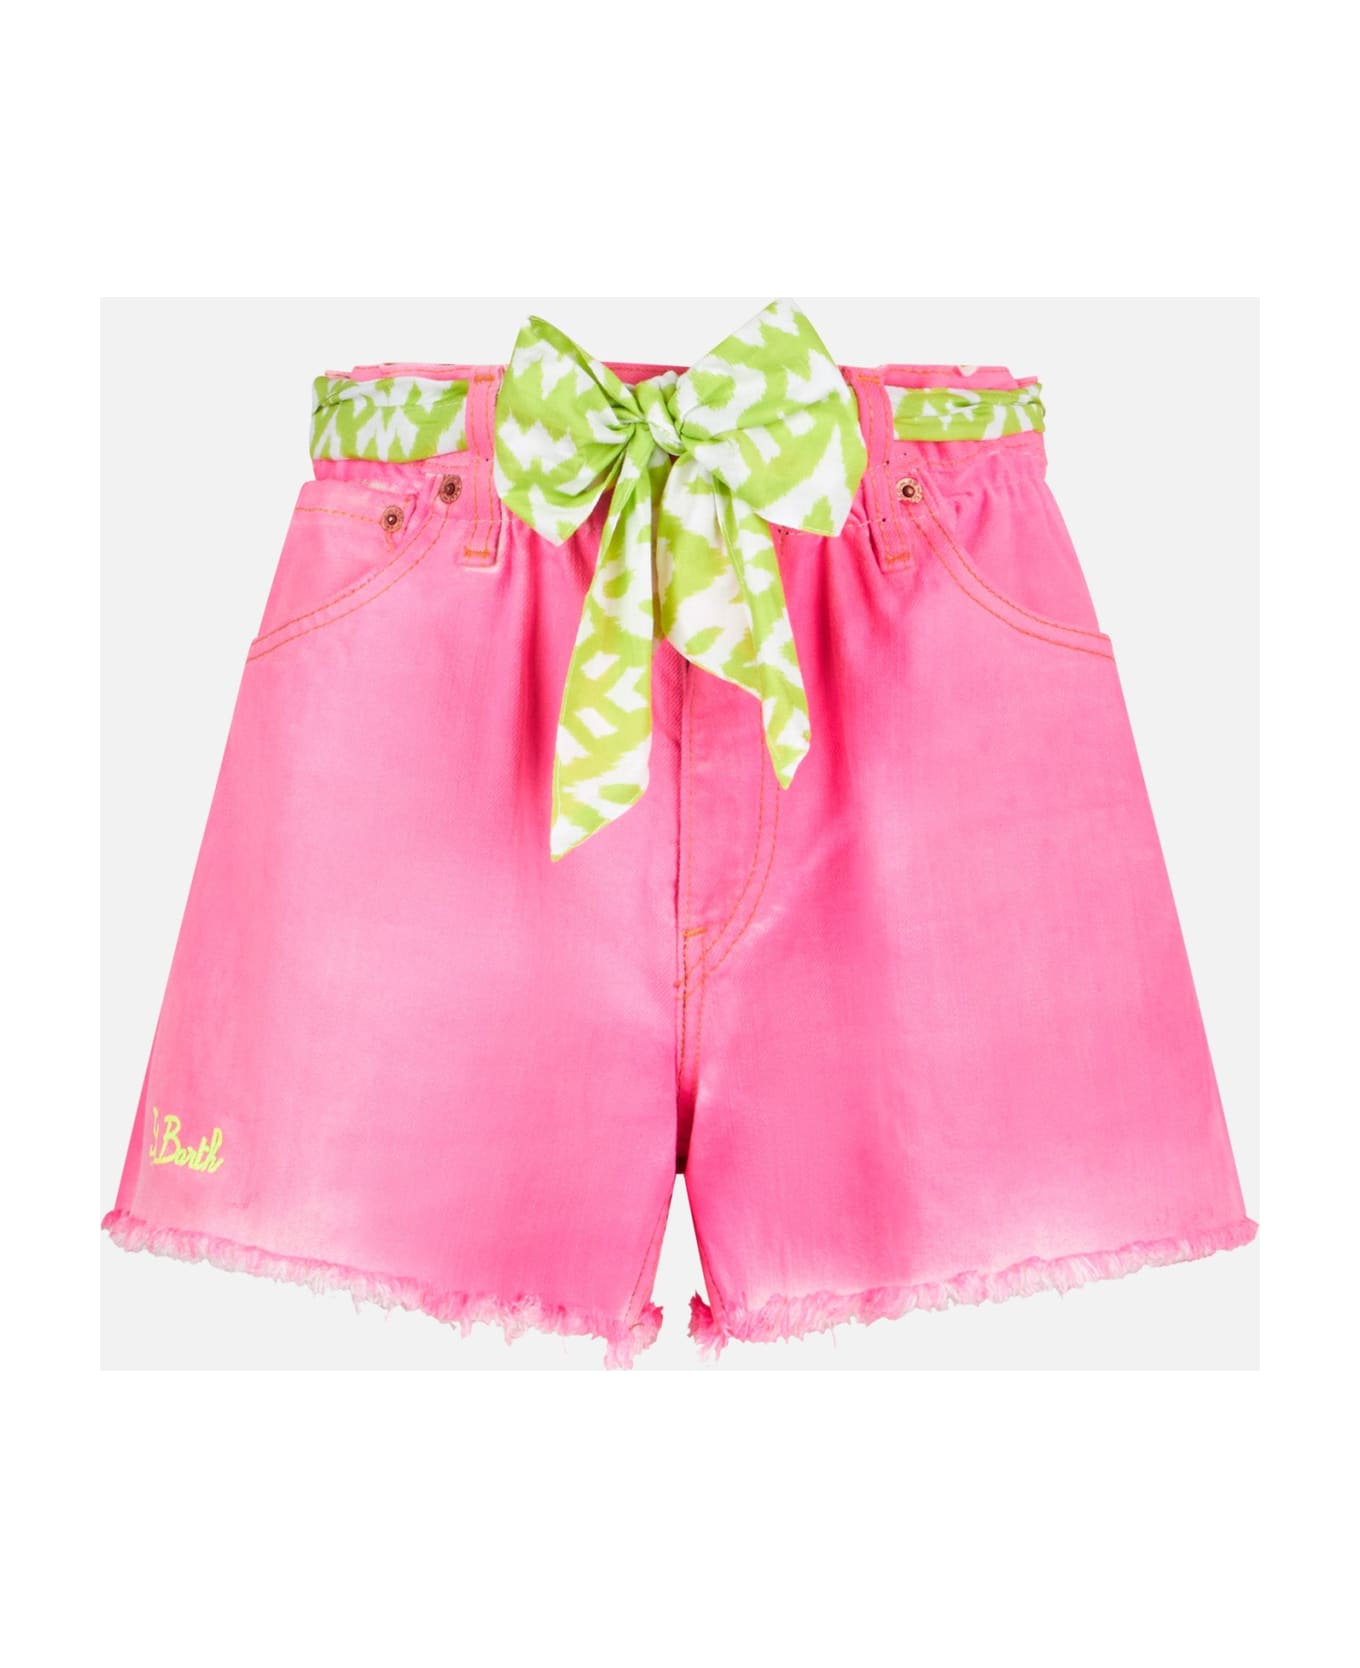 MC2 Saint Barth Woman Upcycled Pink Denim Shorts With Embroidery - PINK